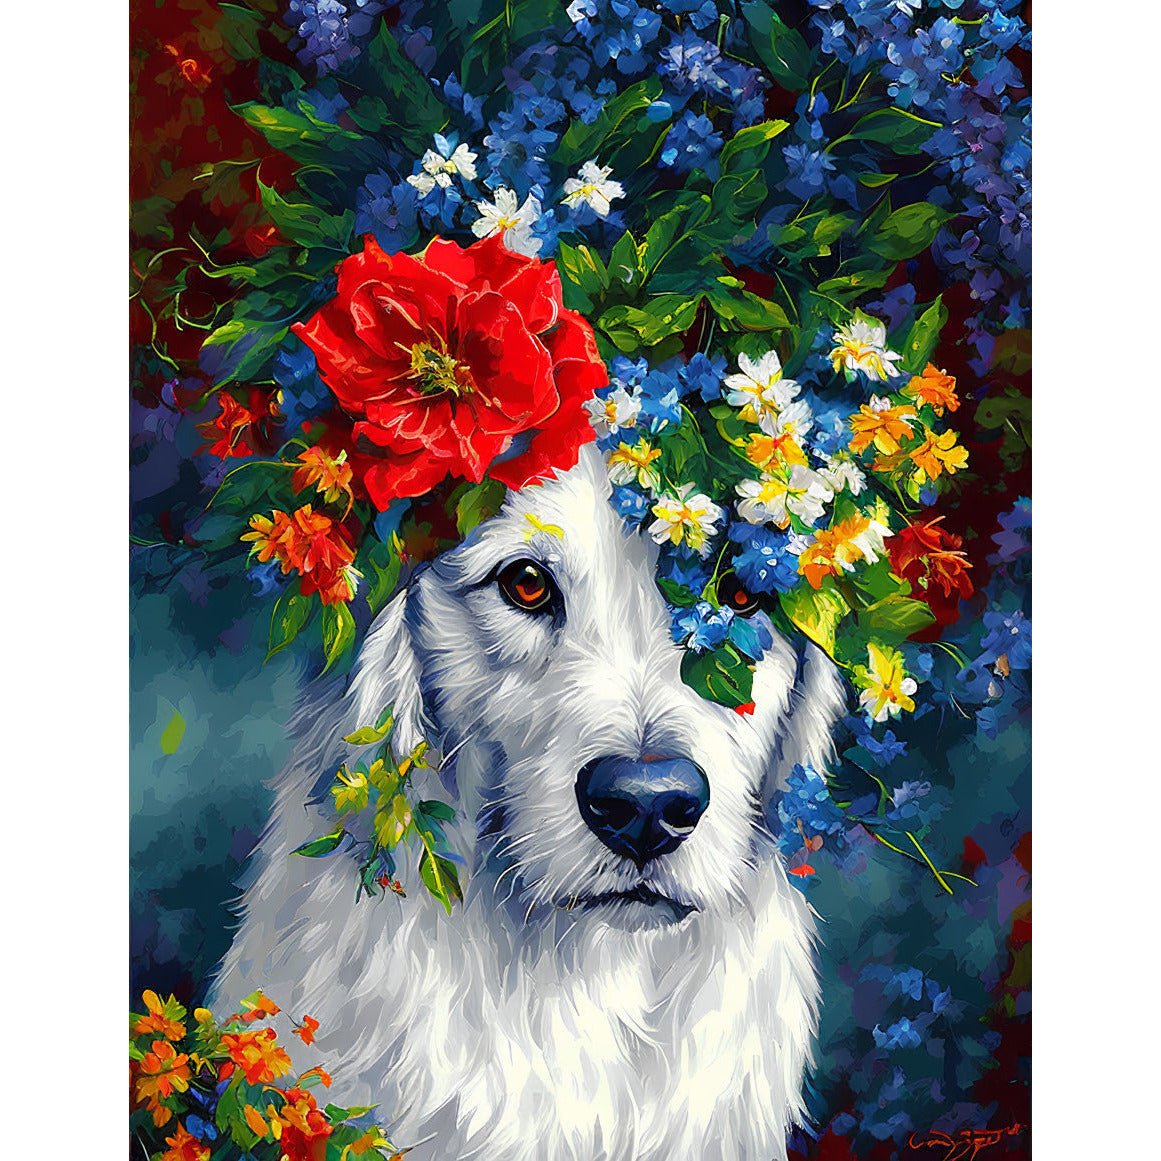 ArtVibe™ DIY Painting By Numbers - Dog in flowers (16x20" / 40x50cm) - ArtVibe Paint by Numbers